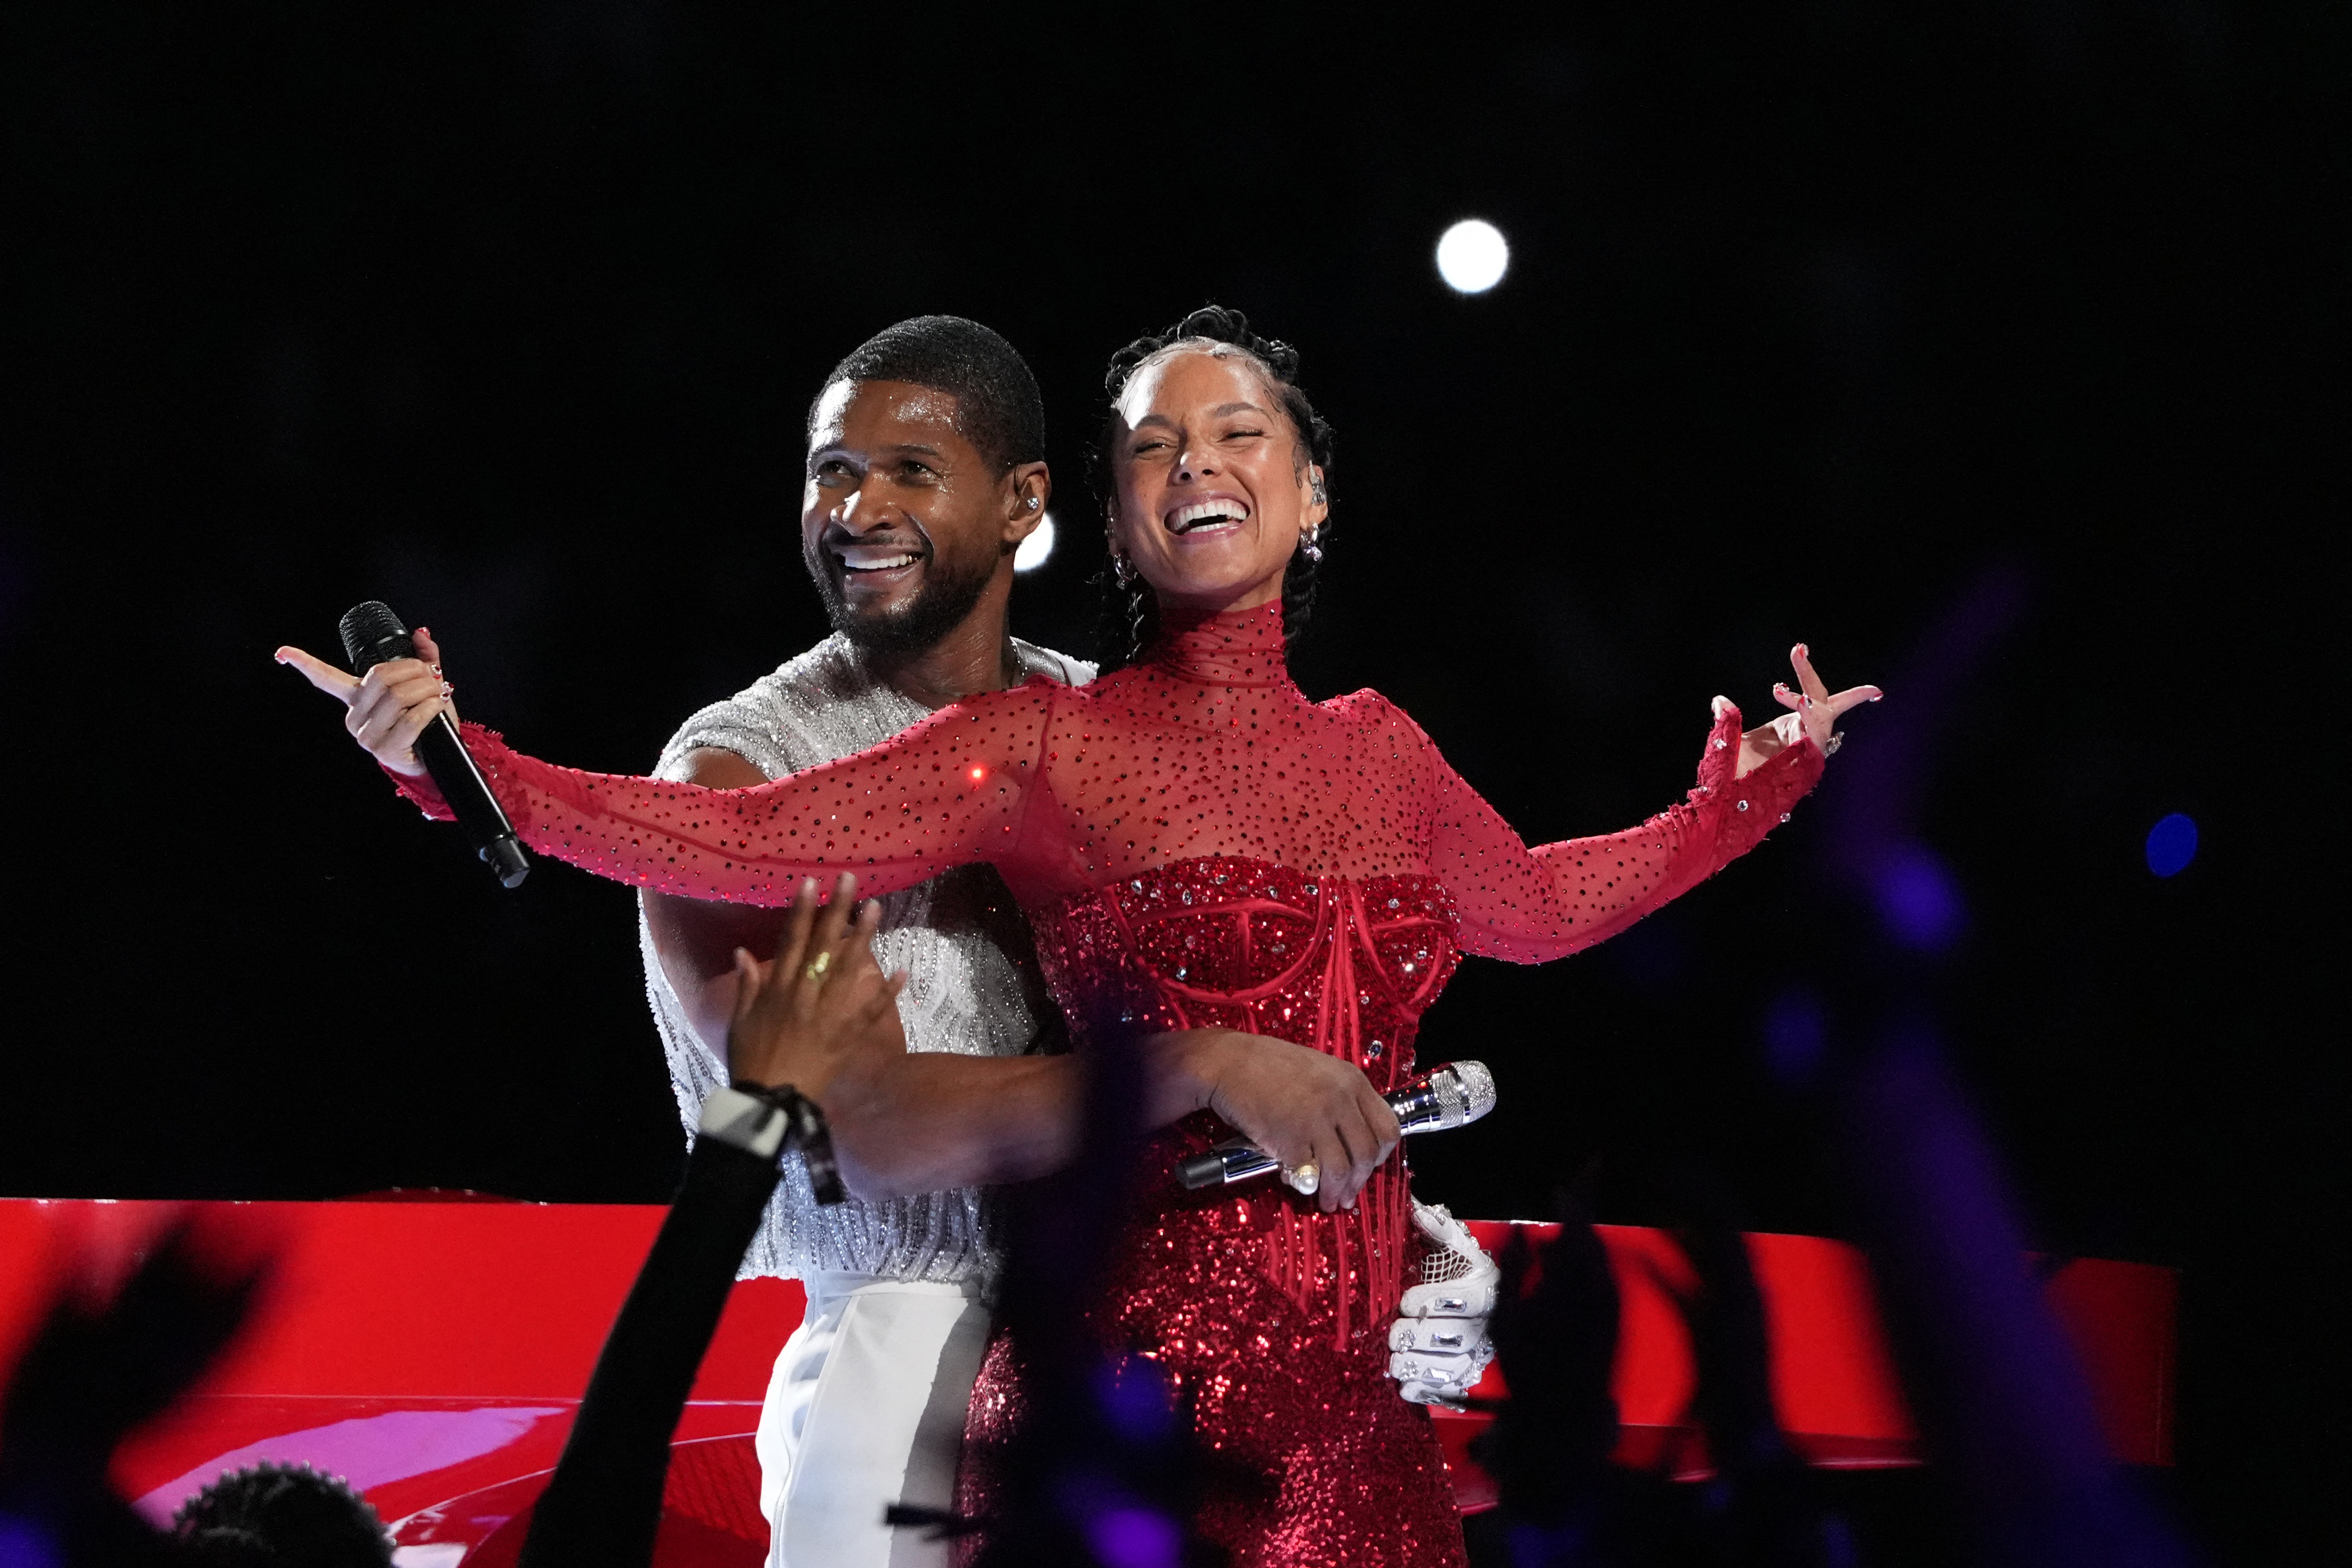 Usher and Alicia embracing and smiling